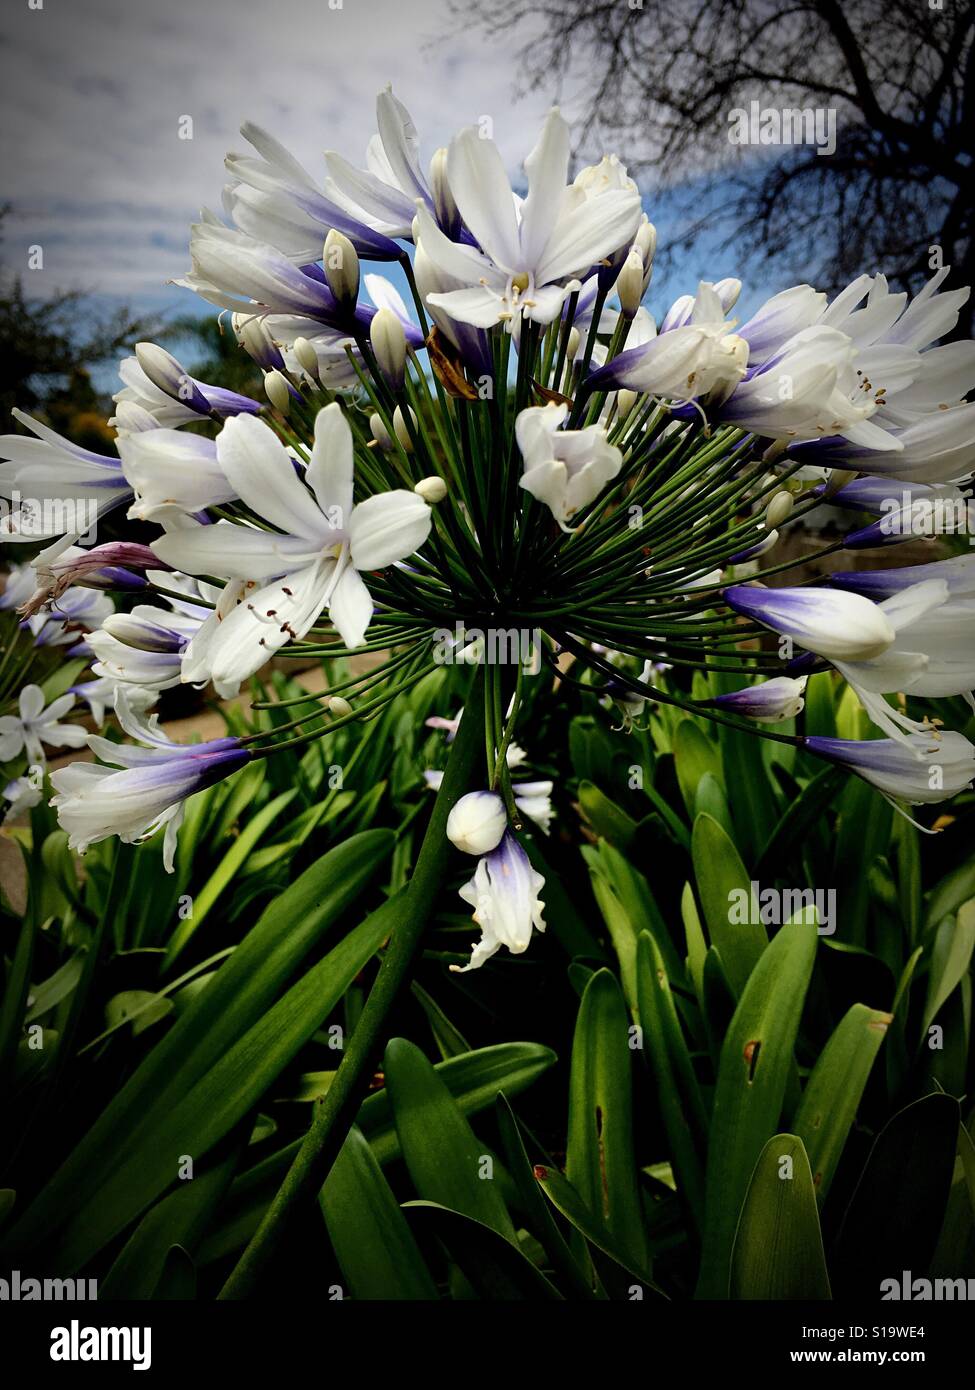 Agapanthus flower head close up Stock Photo